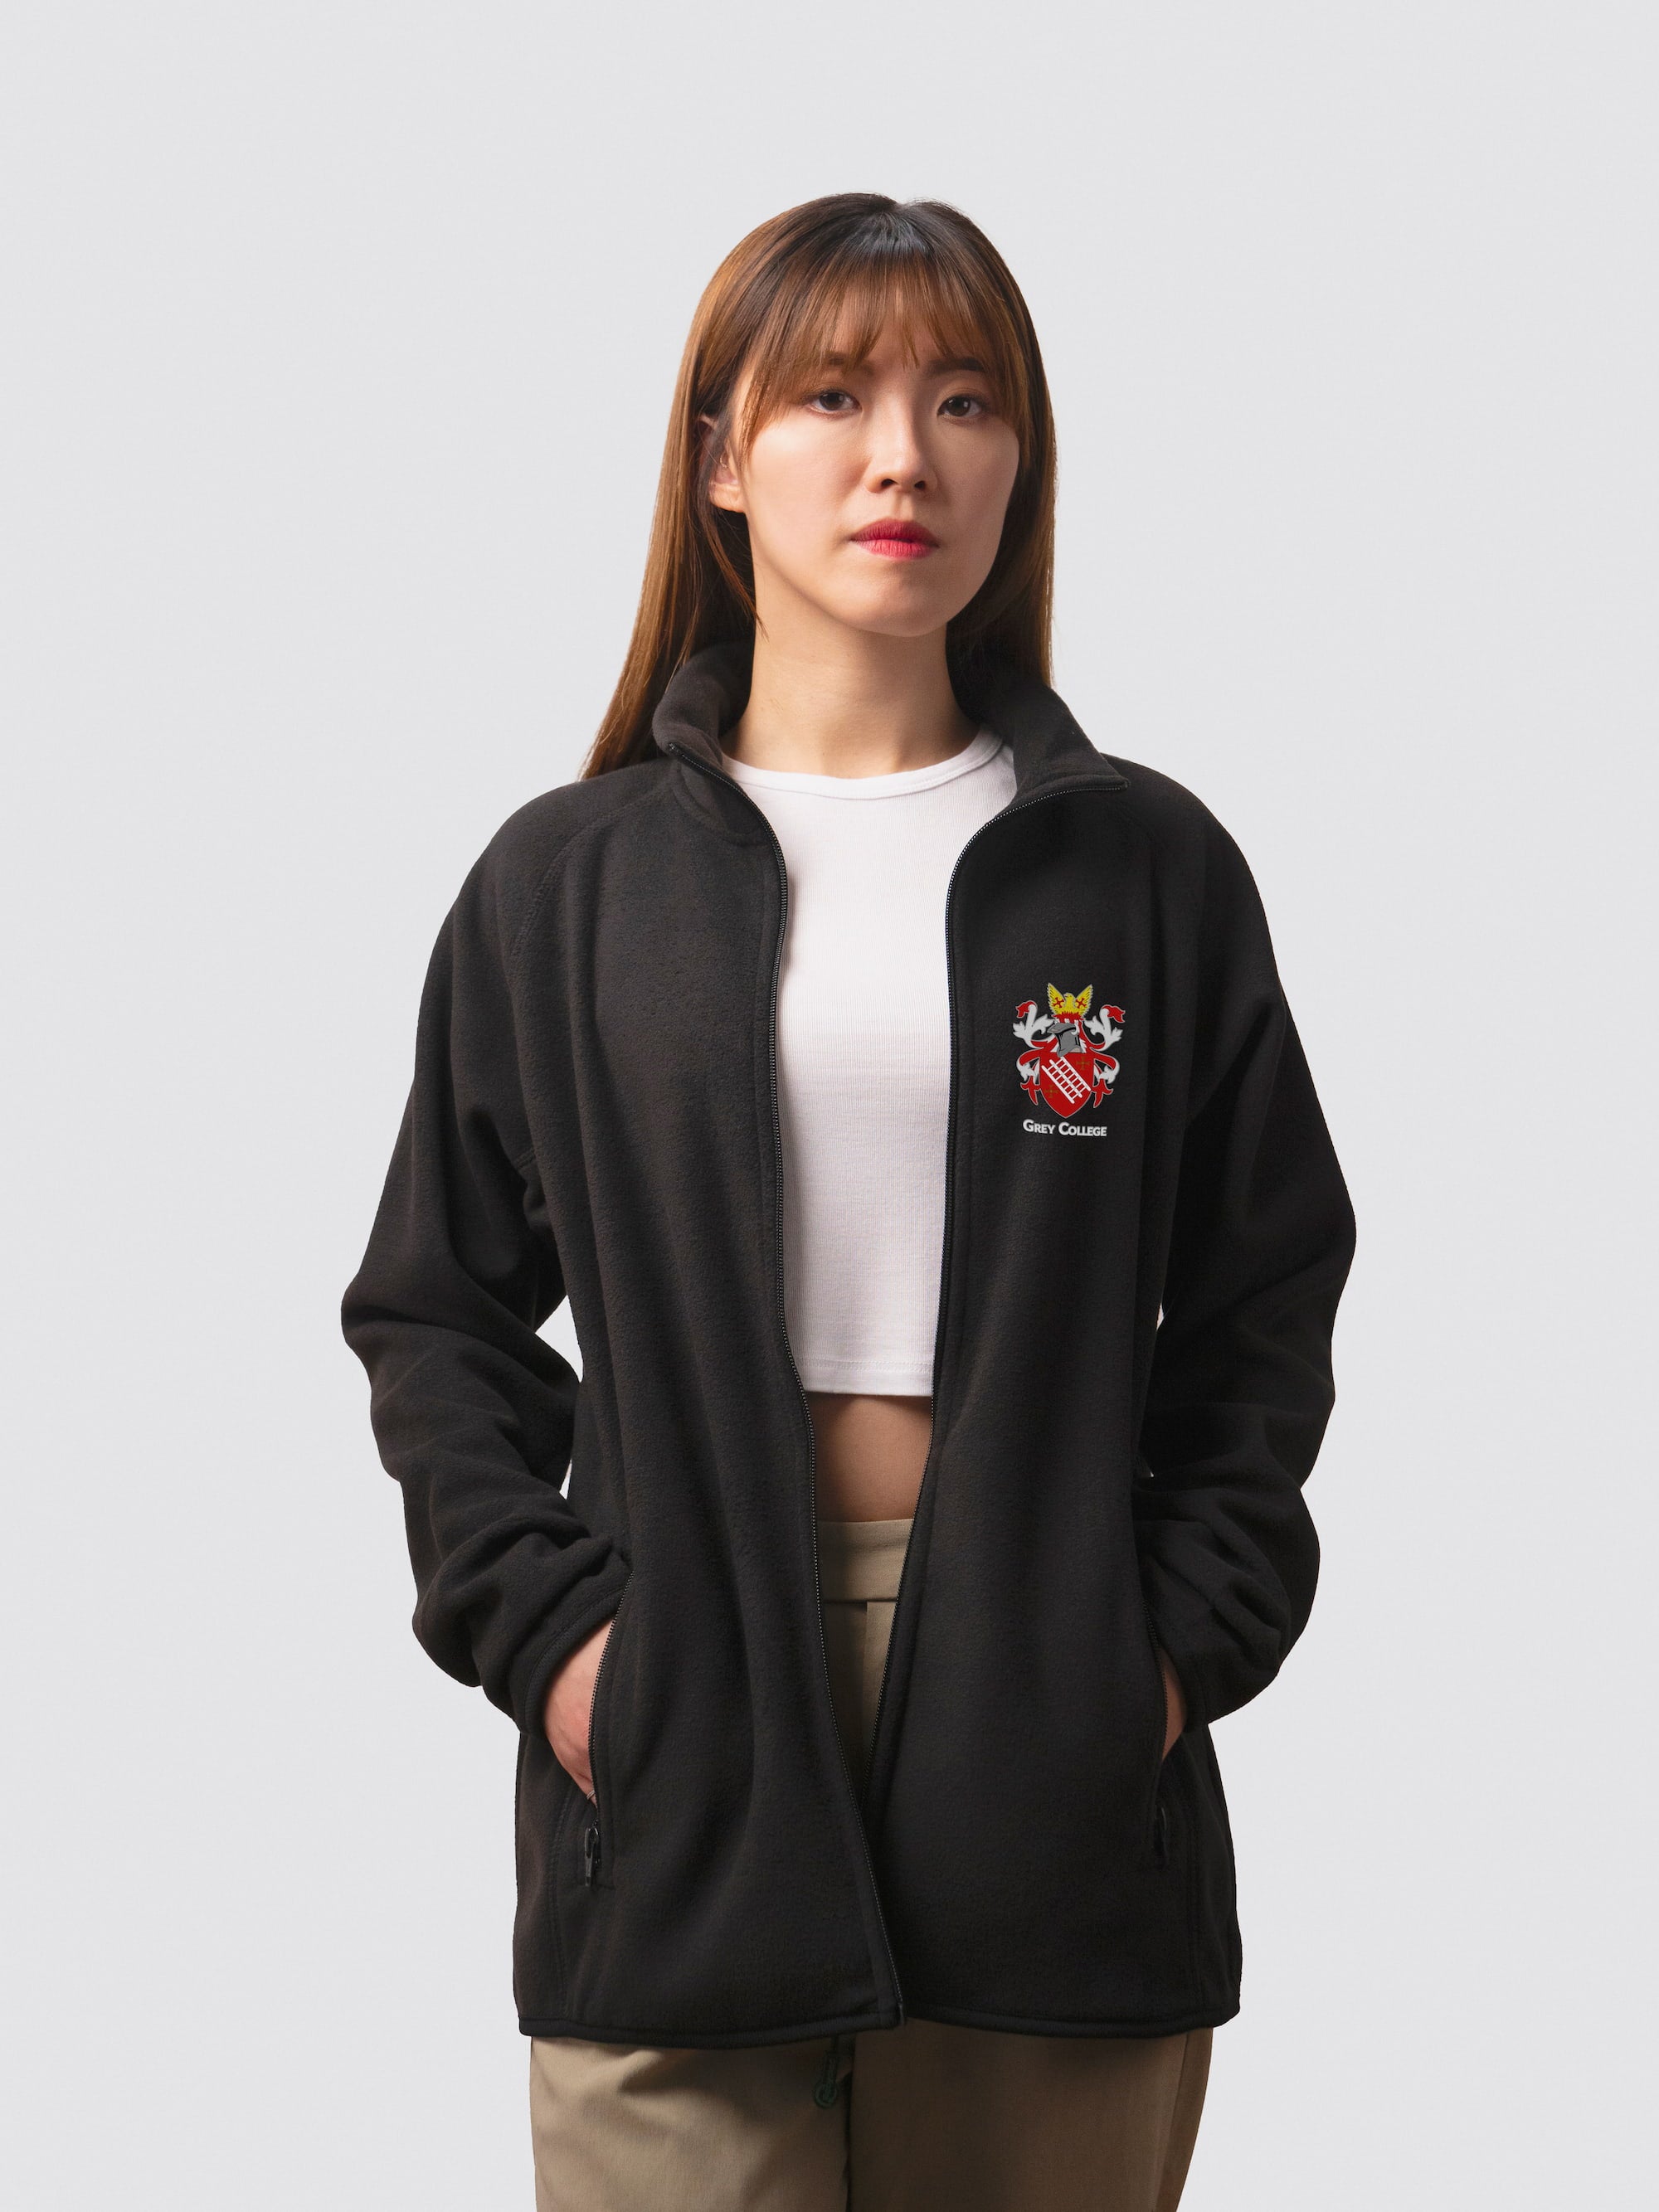 Custom student fleece, with Grey College crest on the left chest